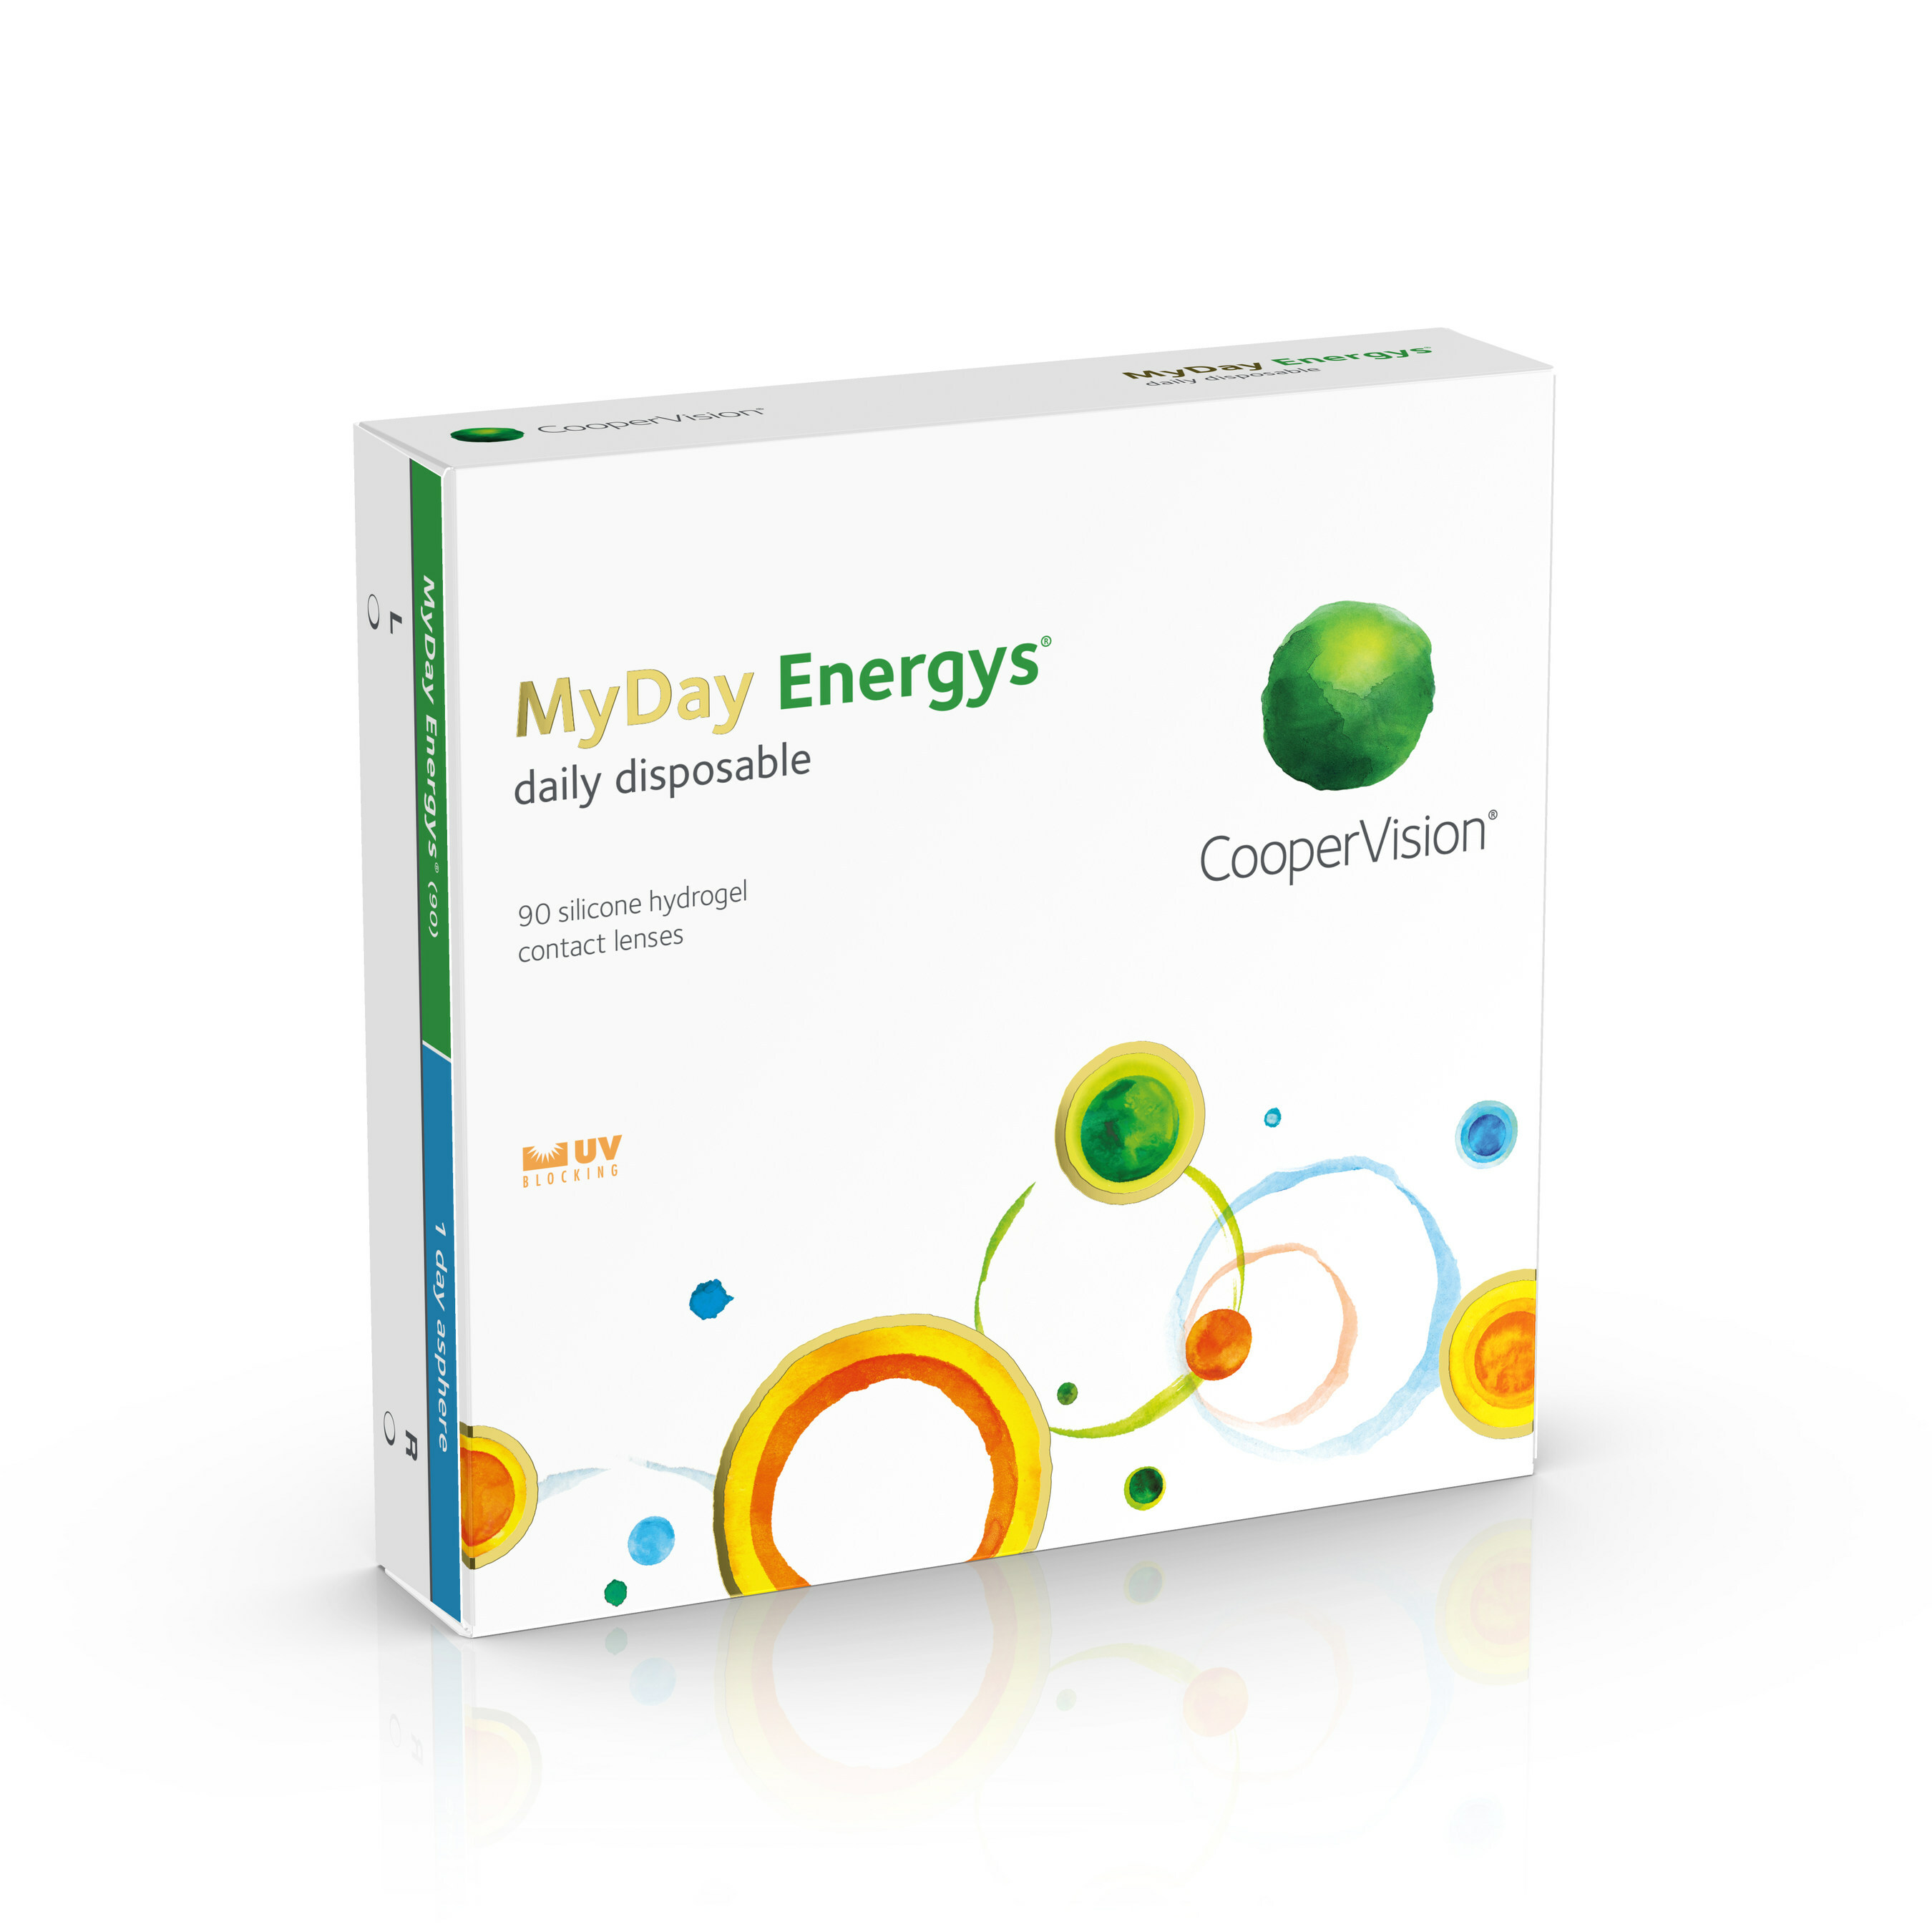 CooperVision MyDay Energys is the first 1-day contact lens to combine the innovative DigitalBoost design and Aquaform Technology to deliver extraordinary comfort for patients' always-on digital lifestyles.